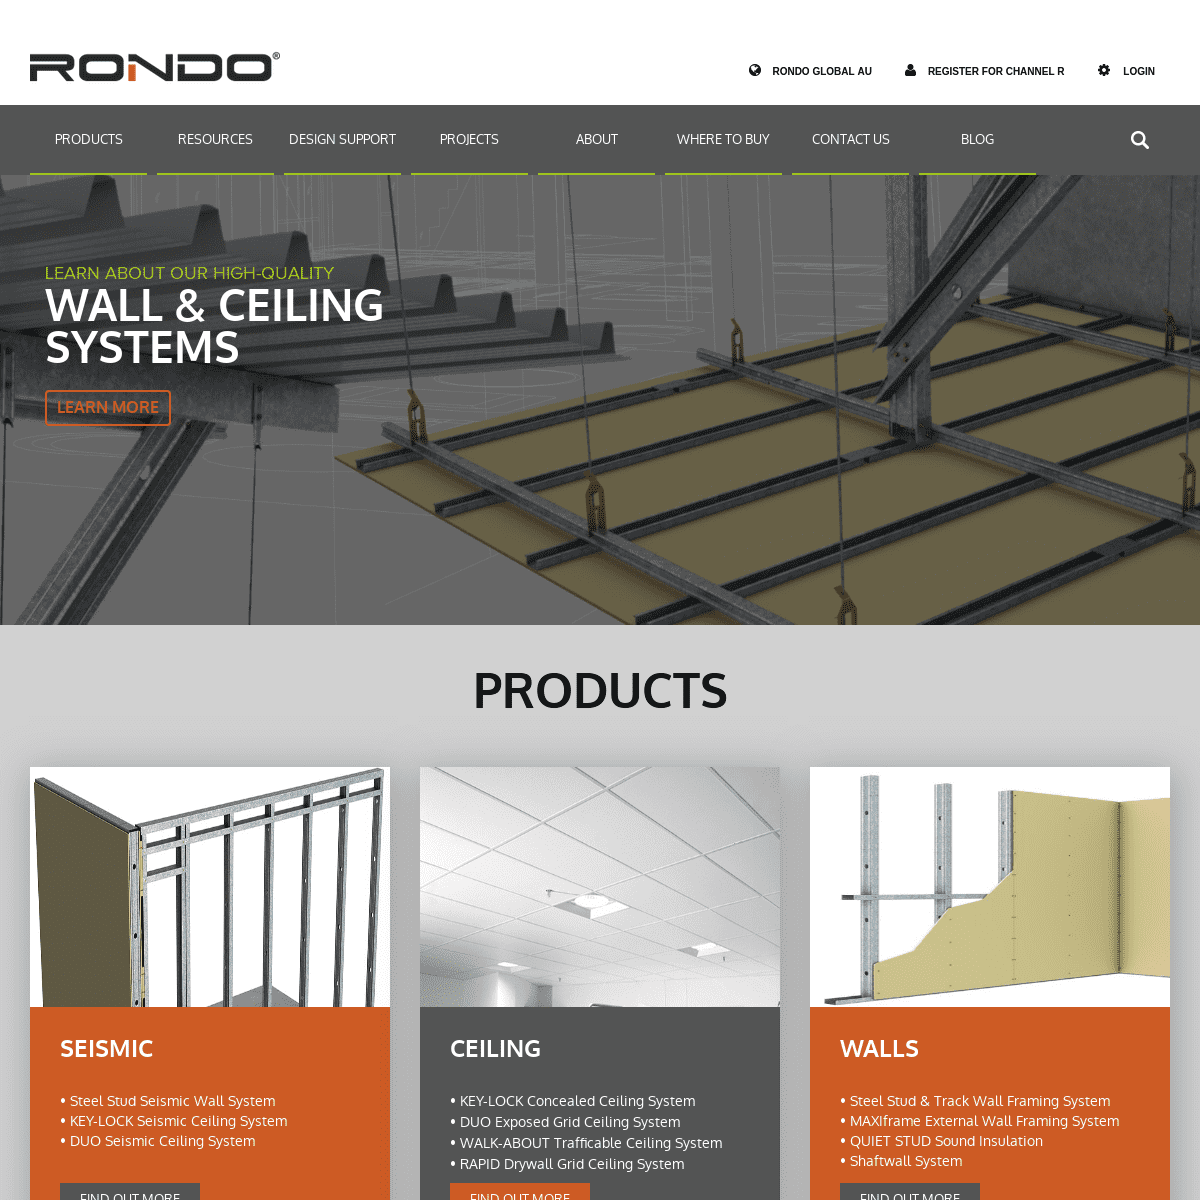 Steel Wall & Ceiling Systems, Access Panel, Finishing Sections and accessories